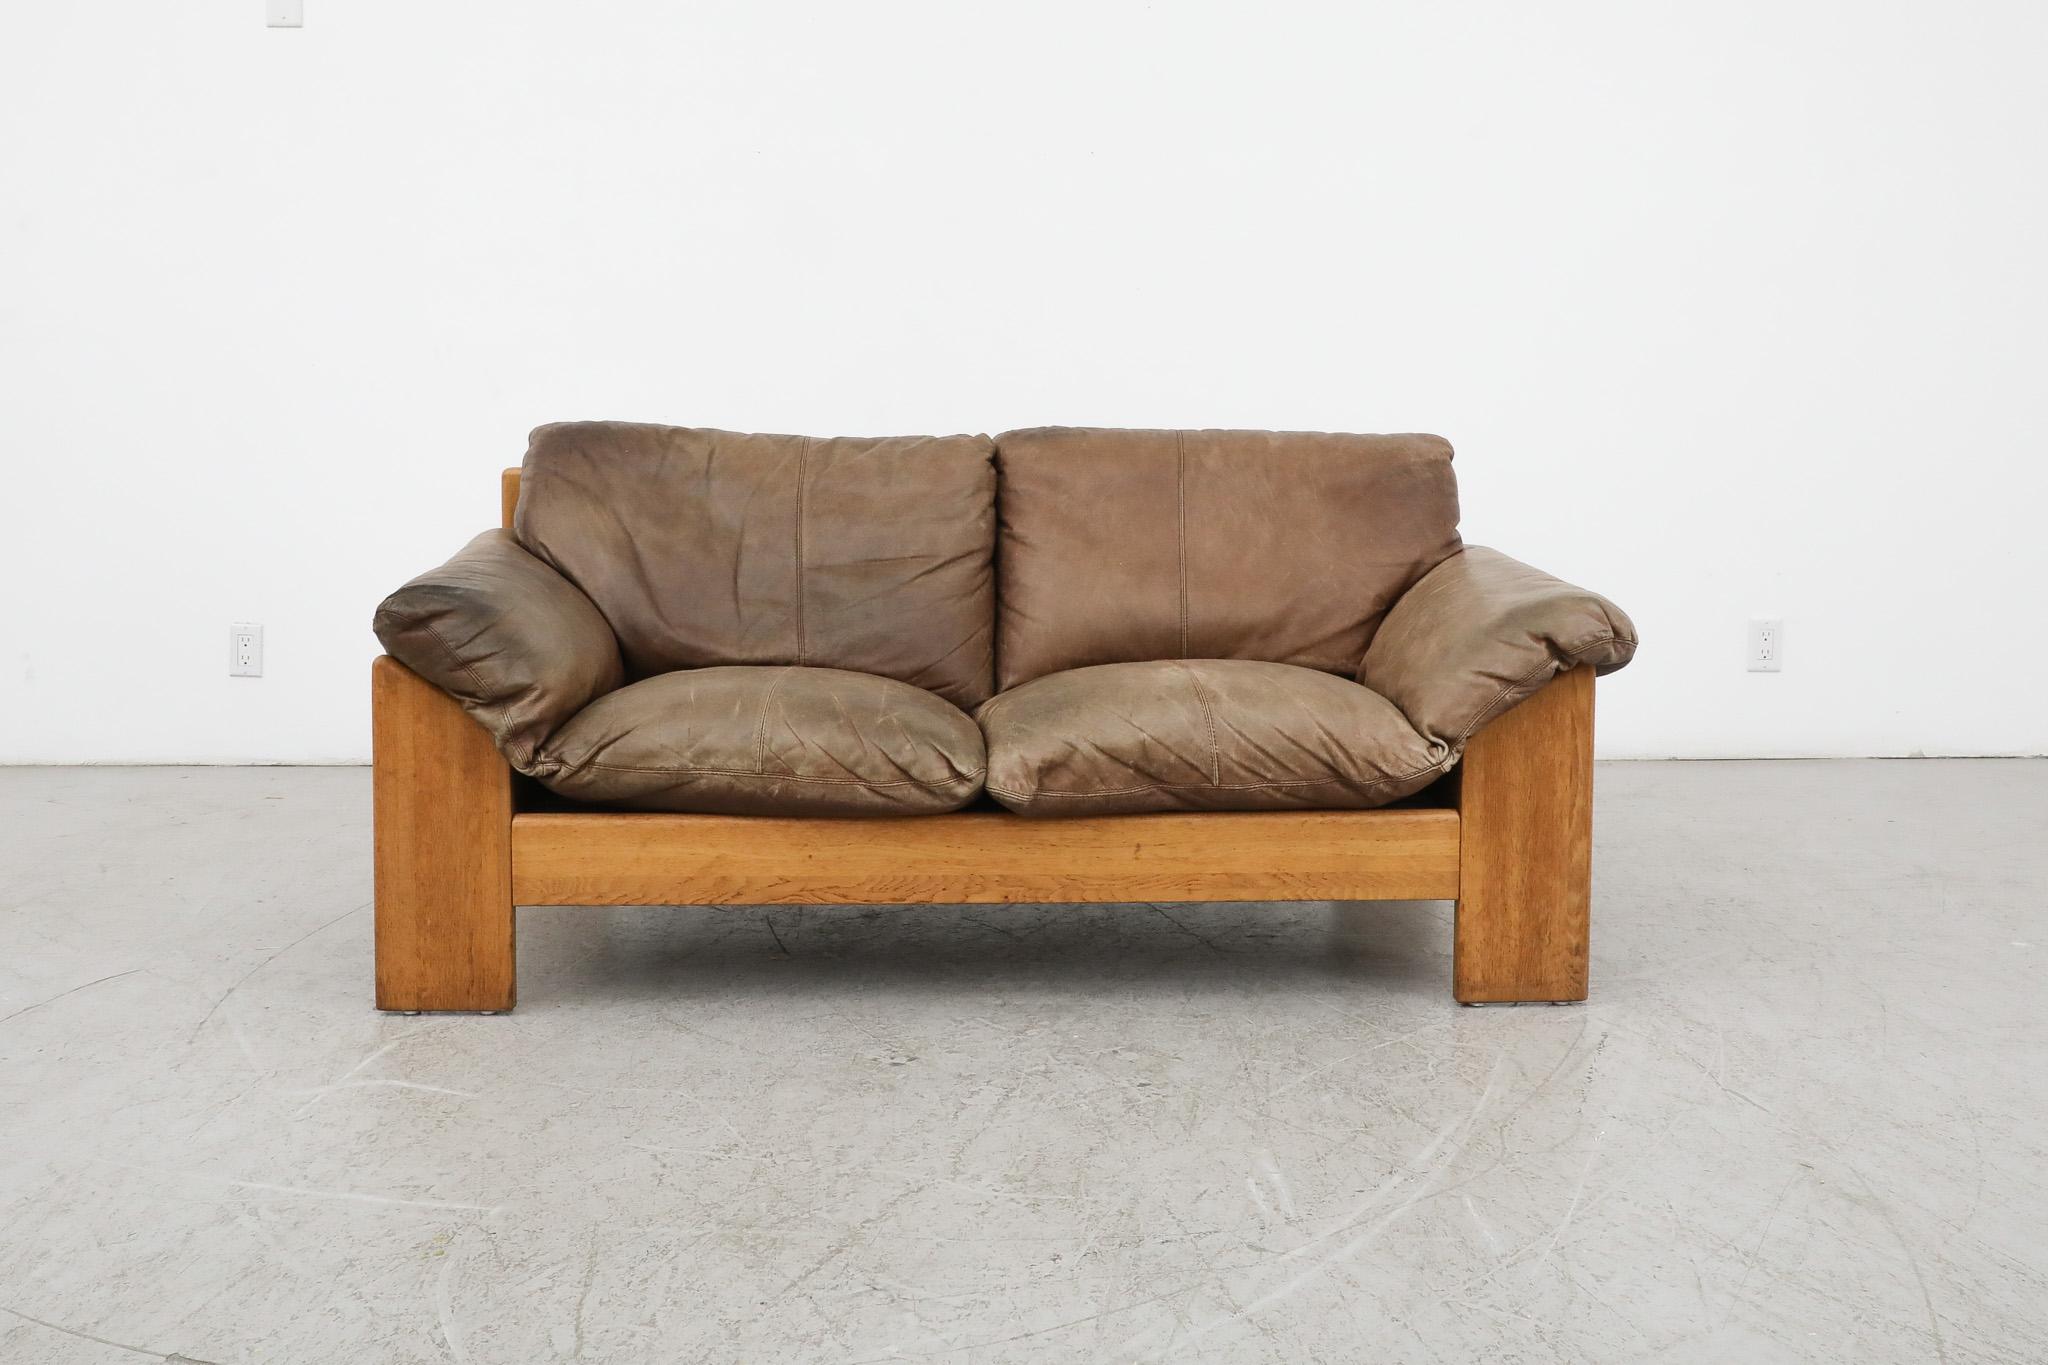 Handsome, Mid-Century Leolux loveseat with beautiful patina. The sofa has a thick natural leather and a lightly refinished oak frame with a matching inset leather back panel. This model is very similar to the Italian 'Sapporo' Sofa by Mobil Girgi.